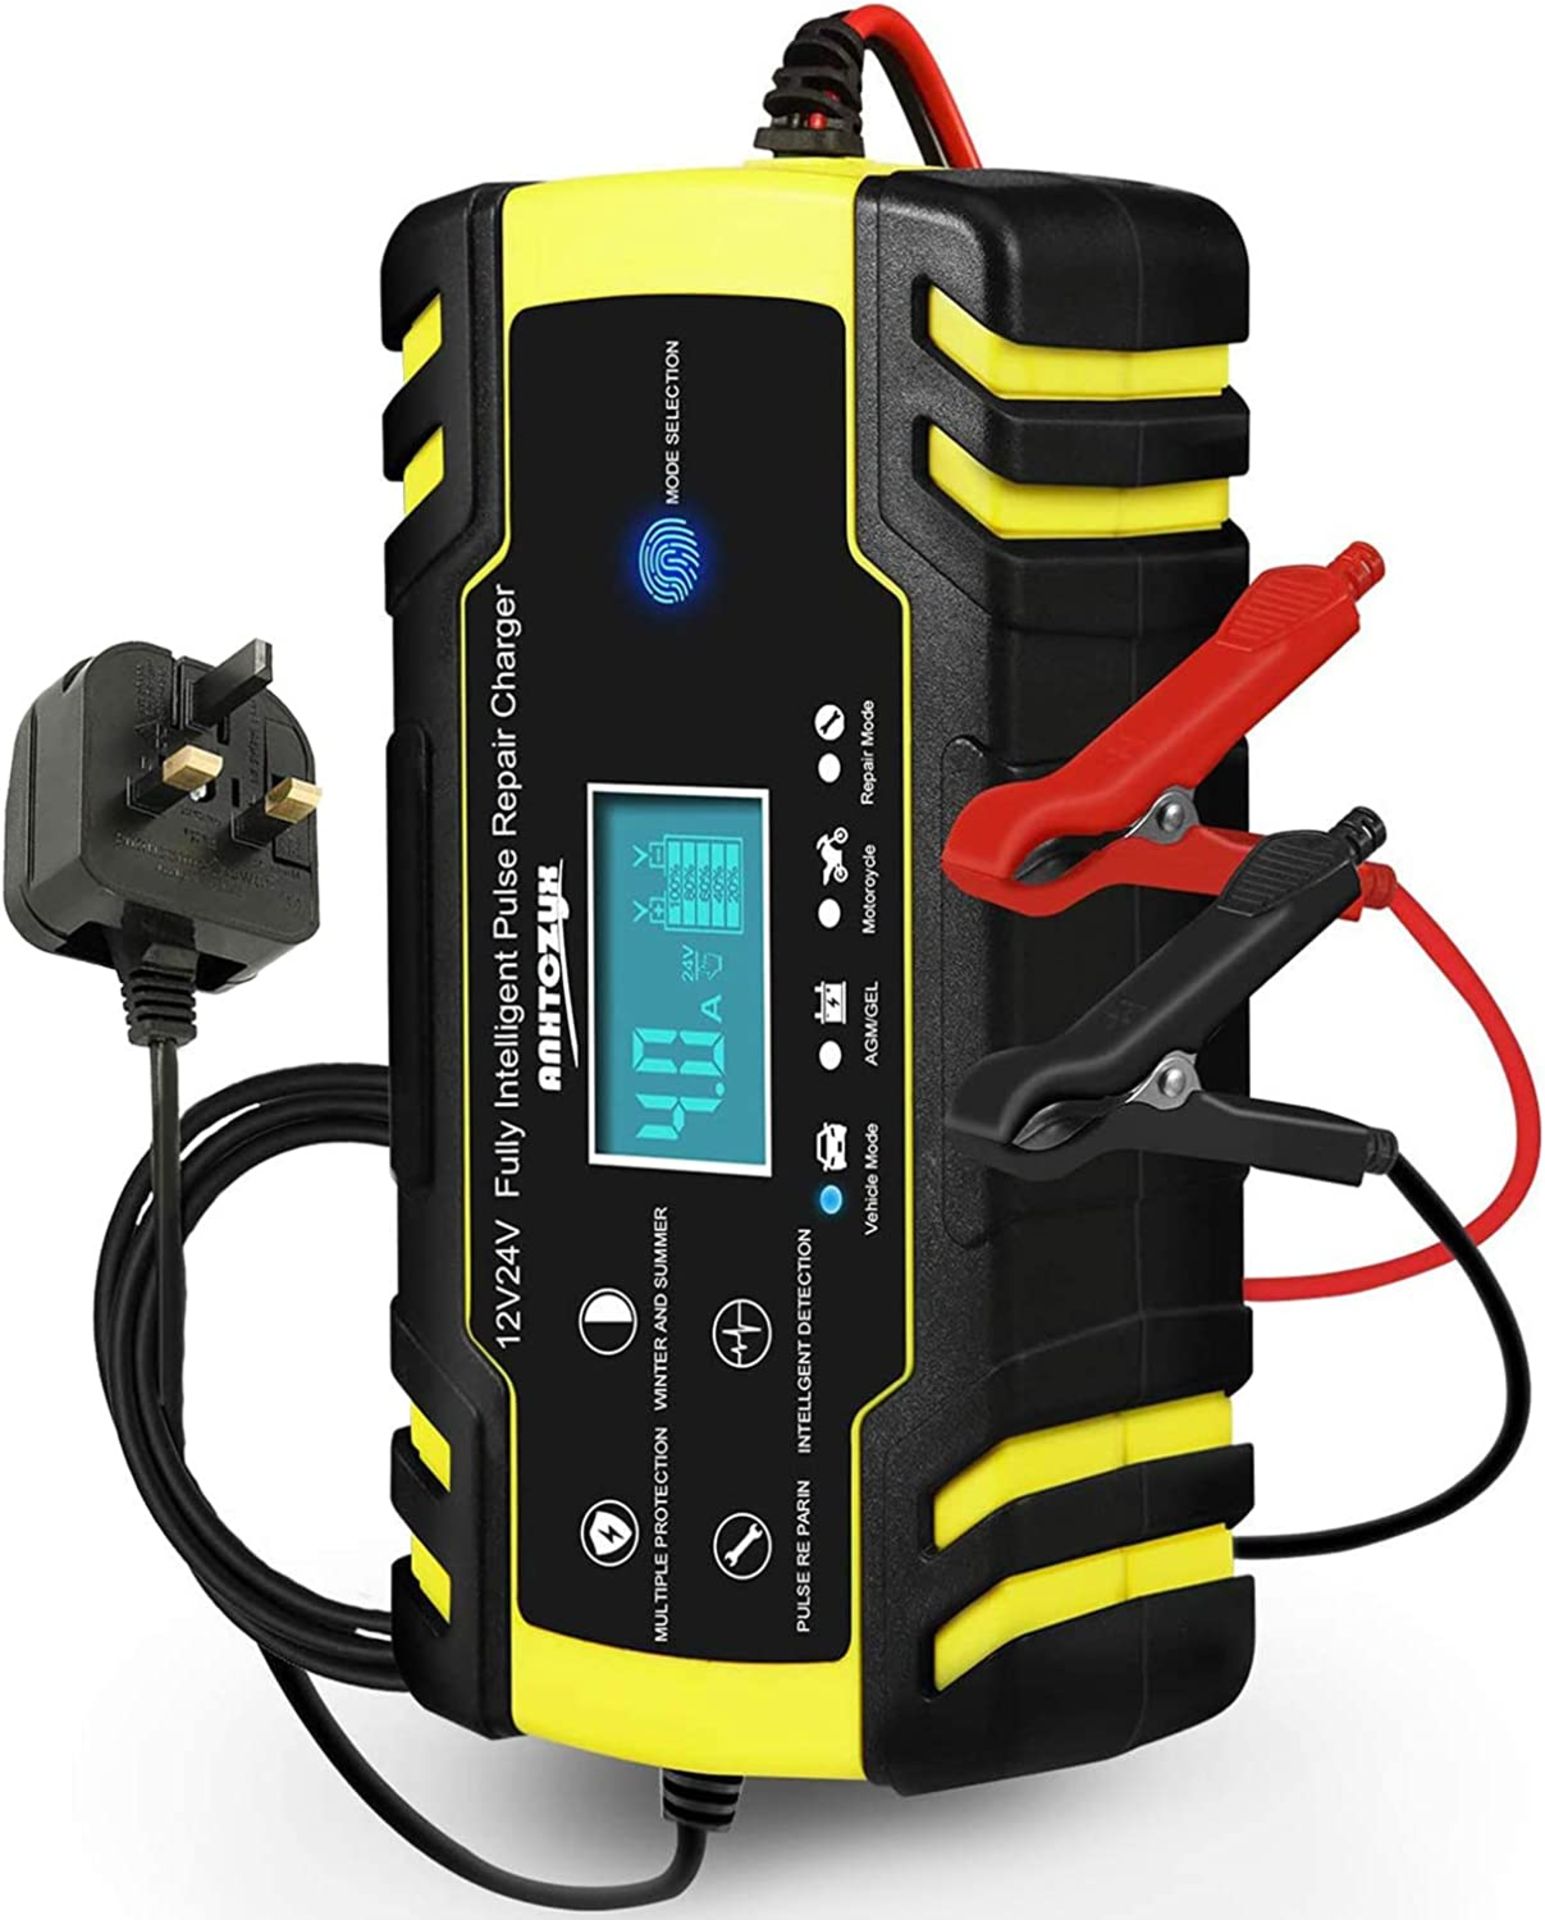 RRP £29.99 HAUSPROFI Car Battery Charger, 12V/24V 8Amp Automatic Battery Charger